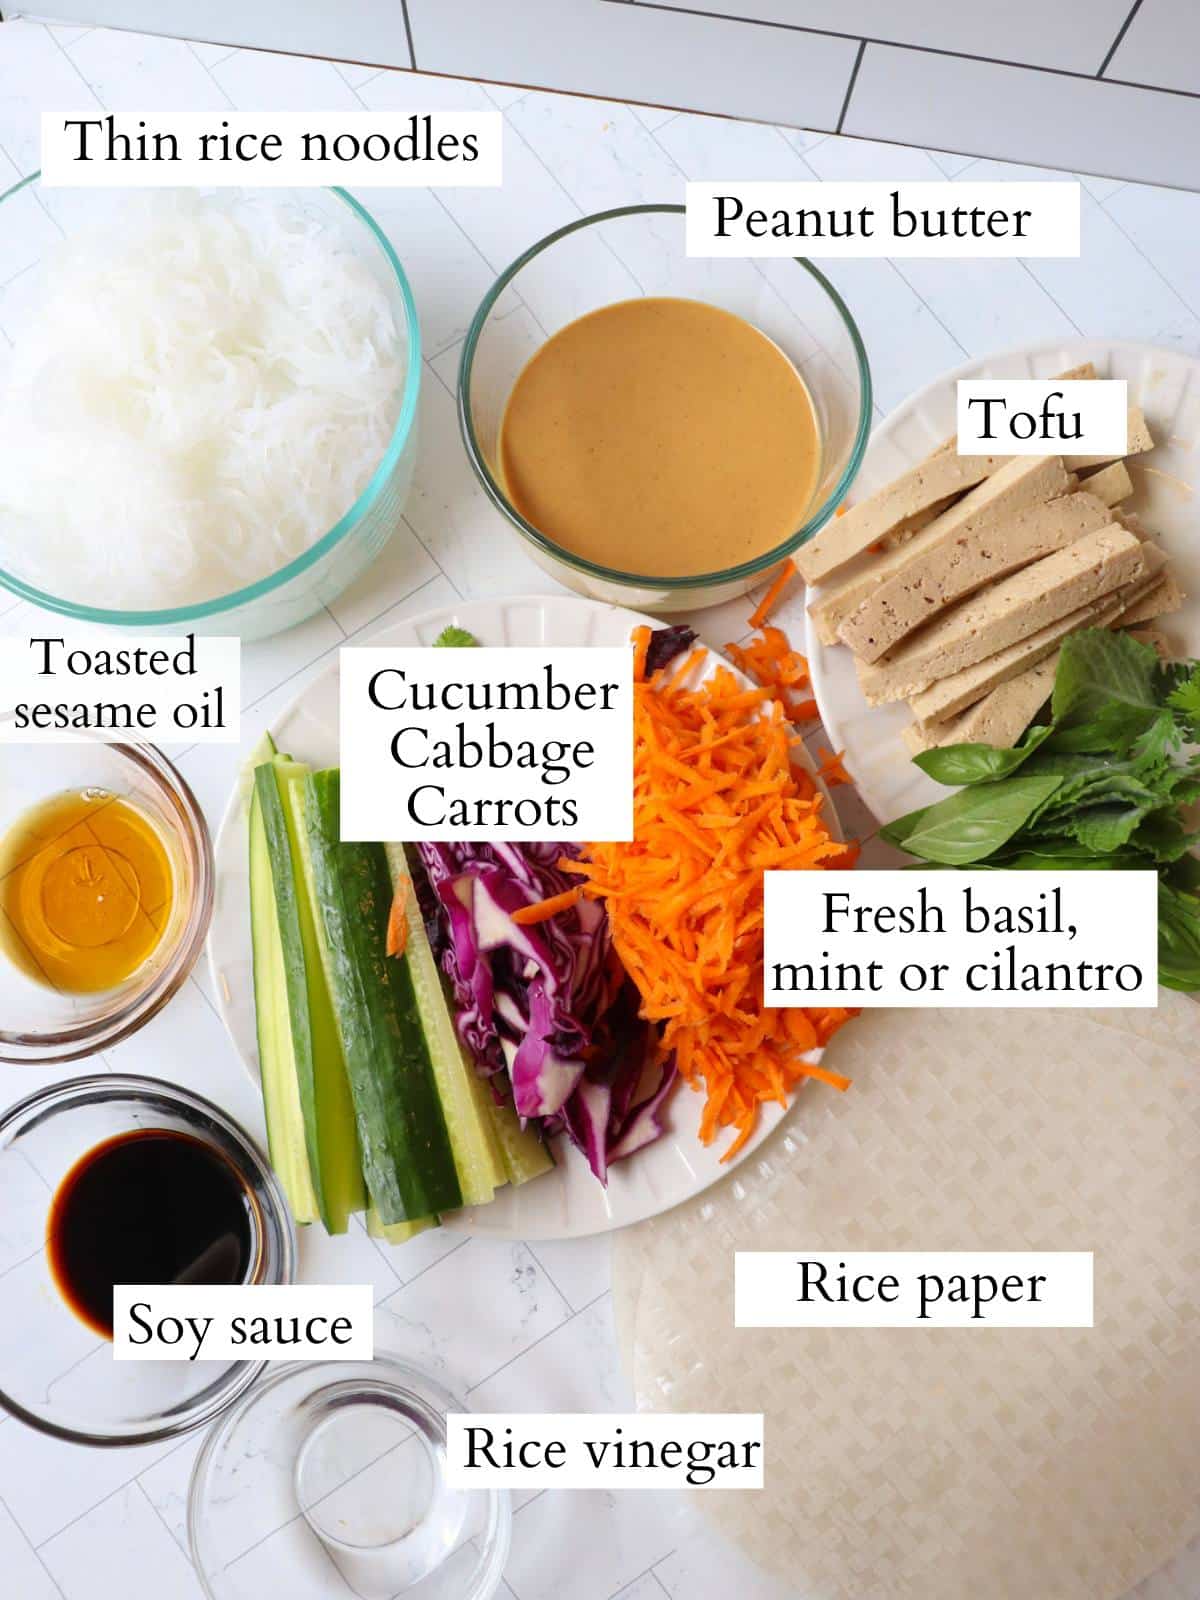 Ingredients for vegan summer rolls laid out on a kitchen counter.